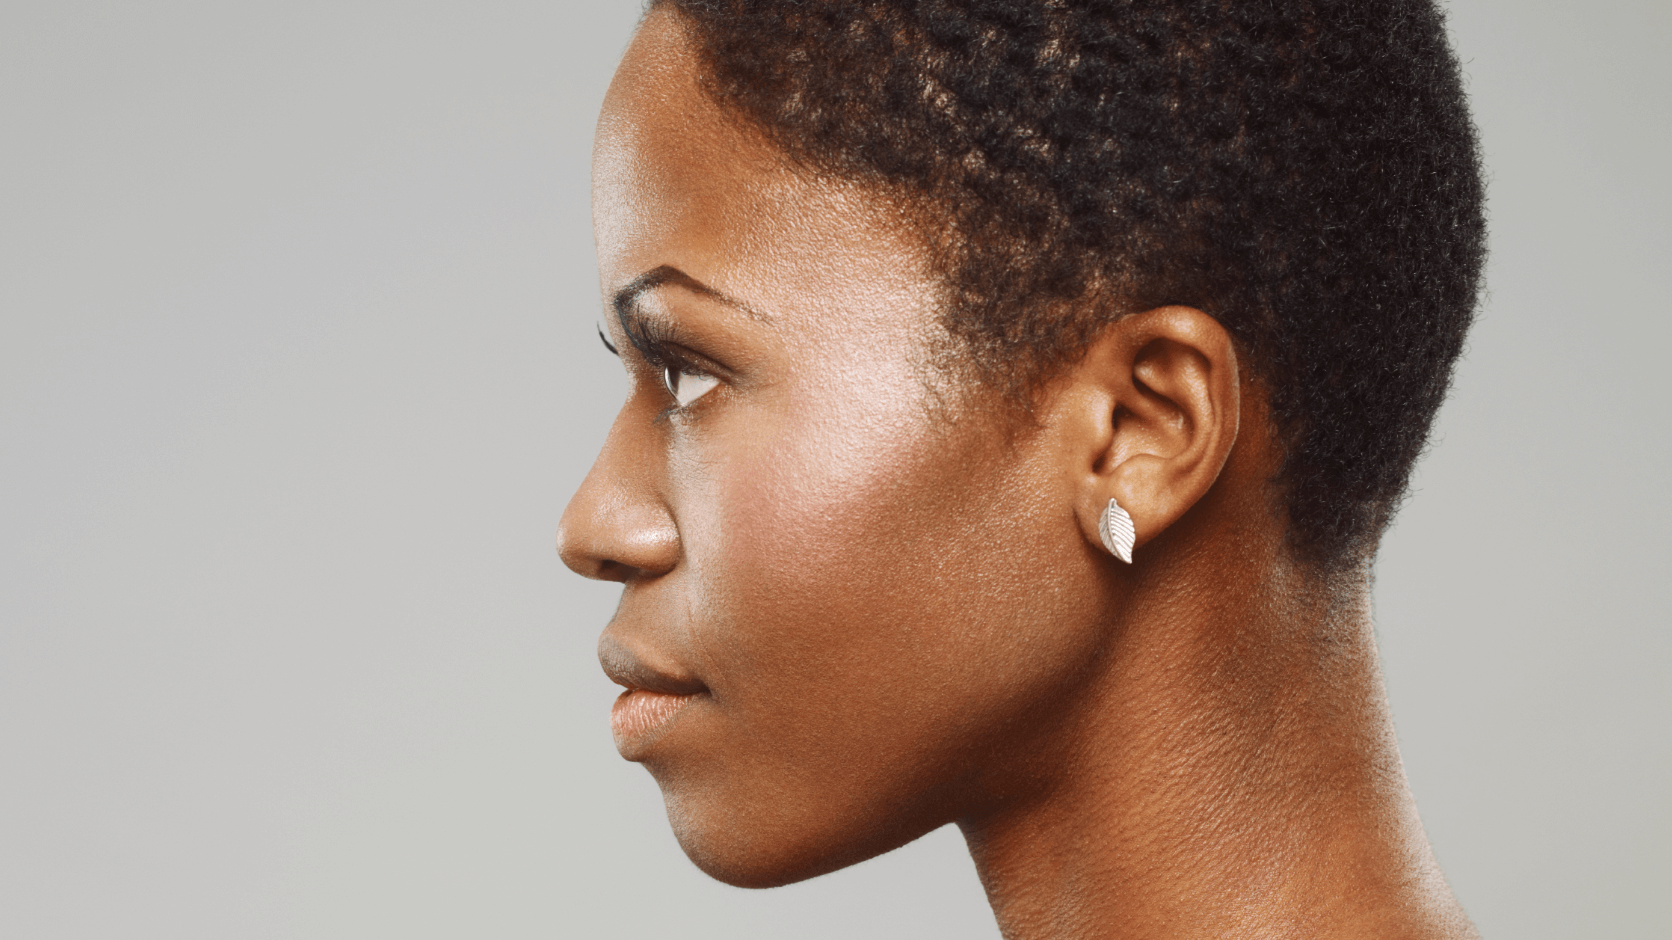 How to Treat An Infected Ear Piercing, According to Dermatologists